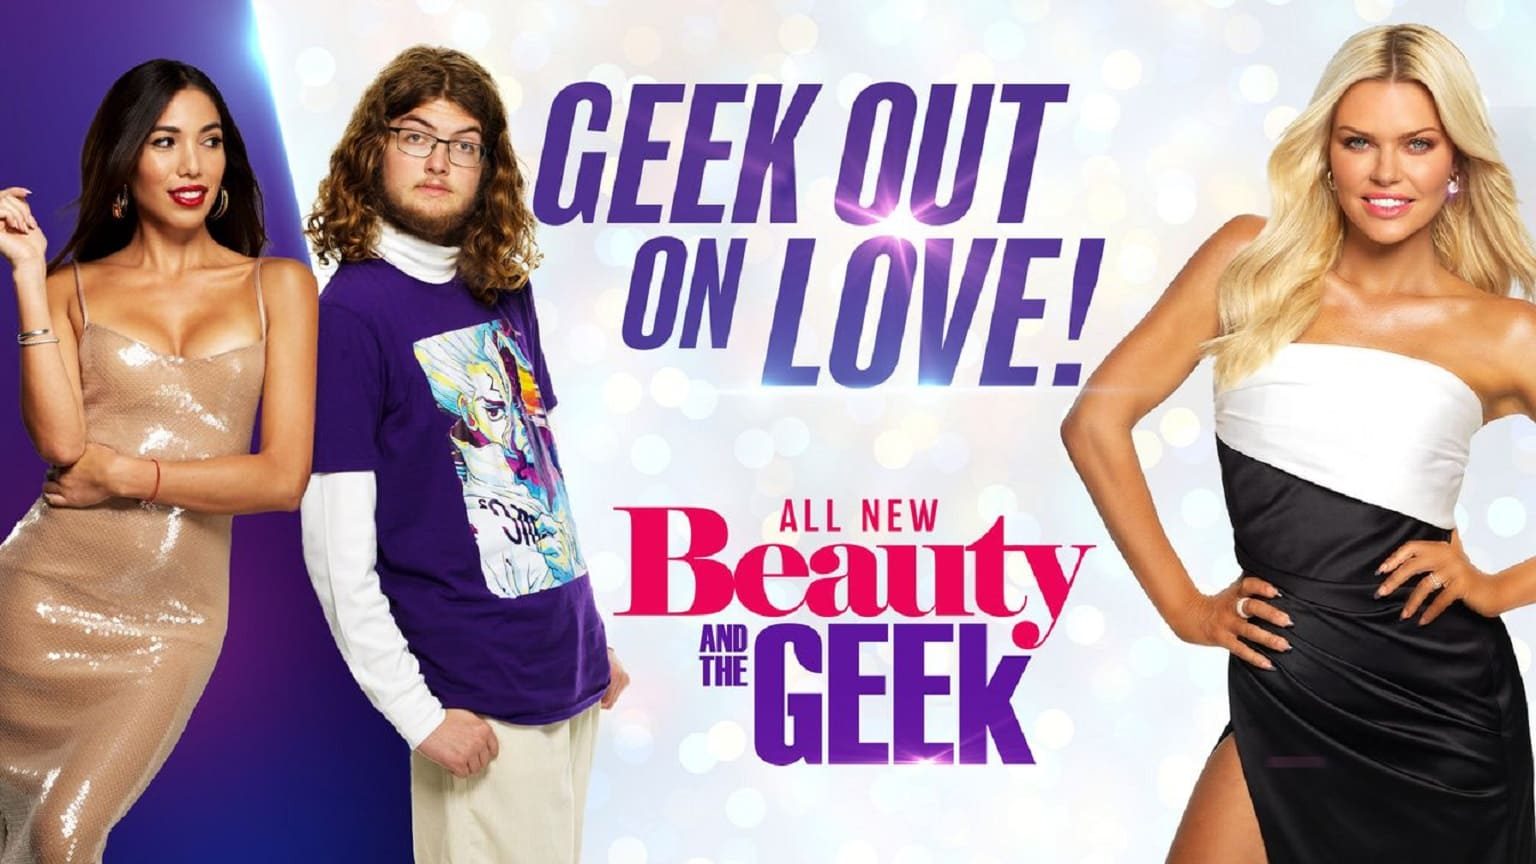 Beauty and the geeks